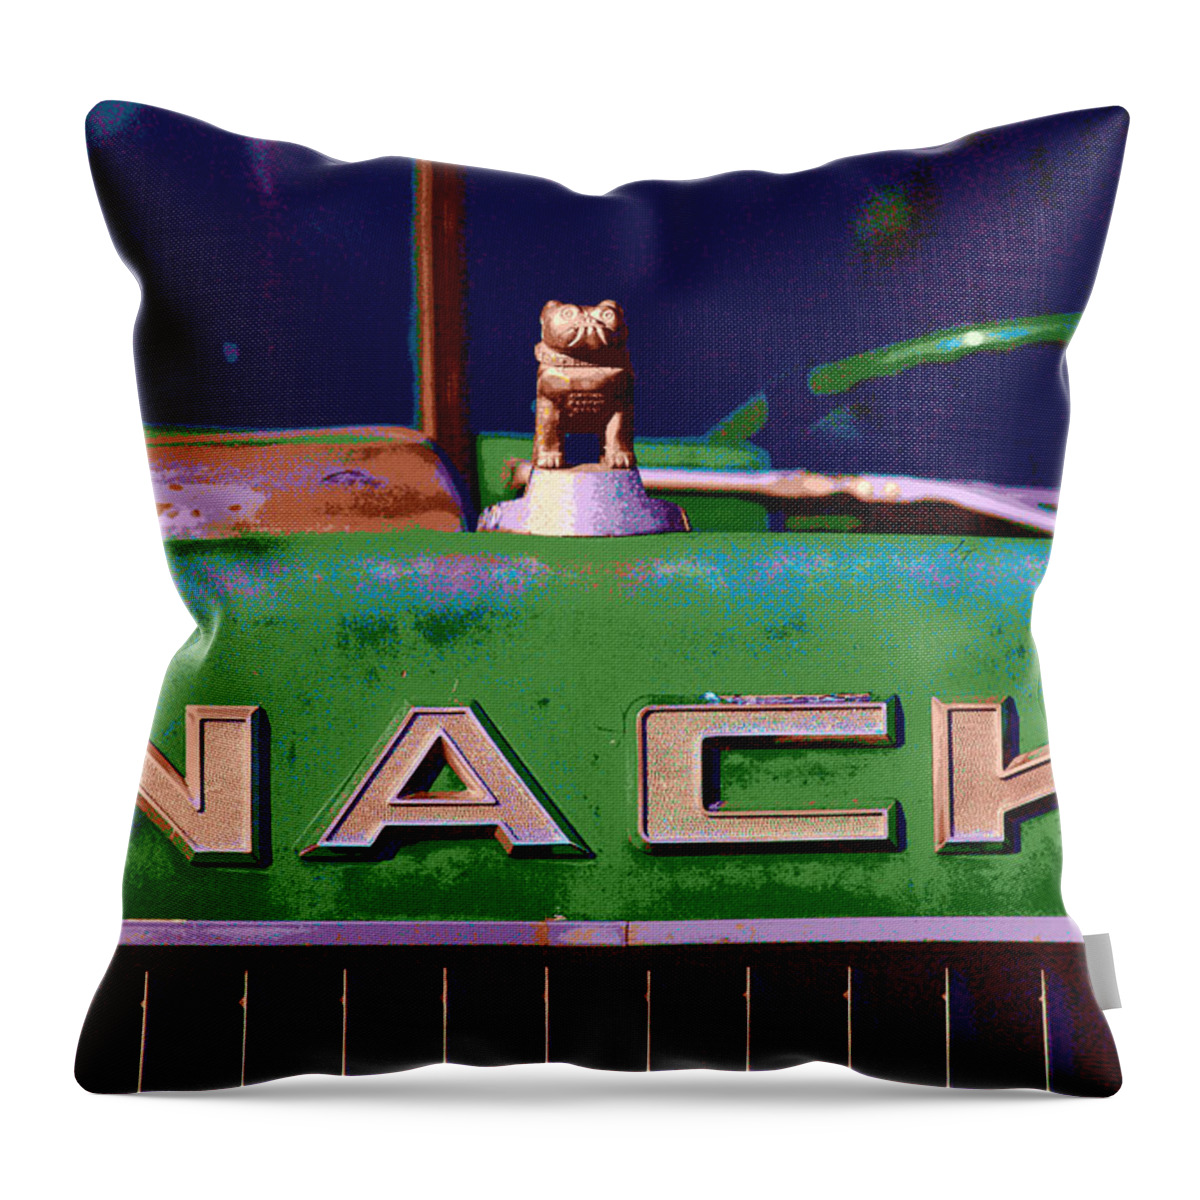 Truck Throw Pillow featuring the photograph Wack Truck by William Jobes